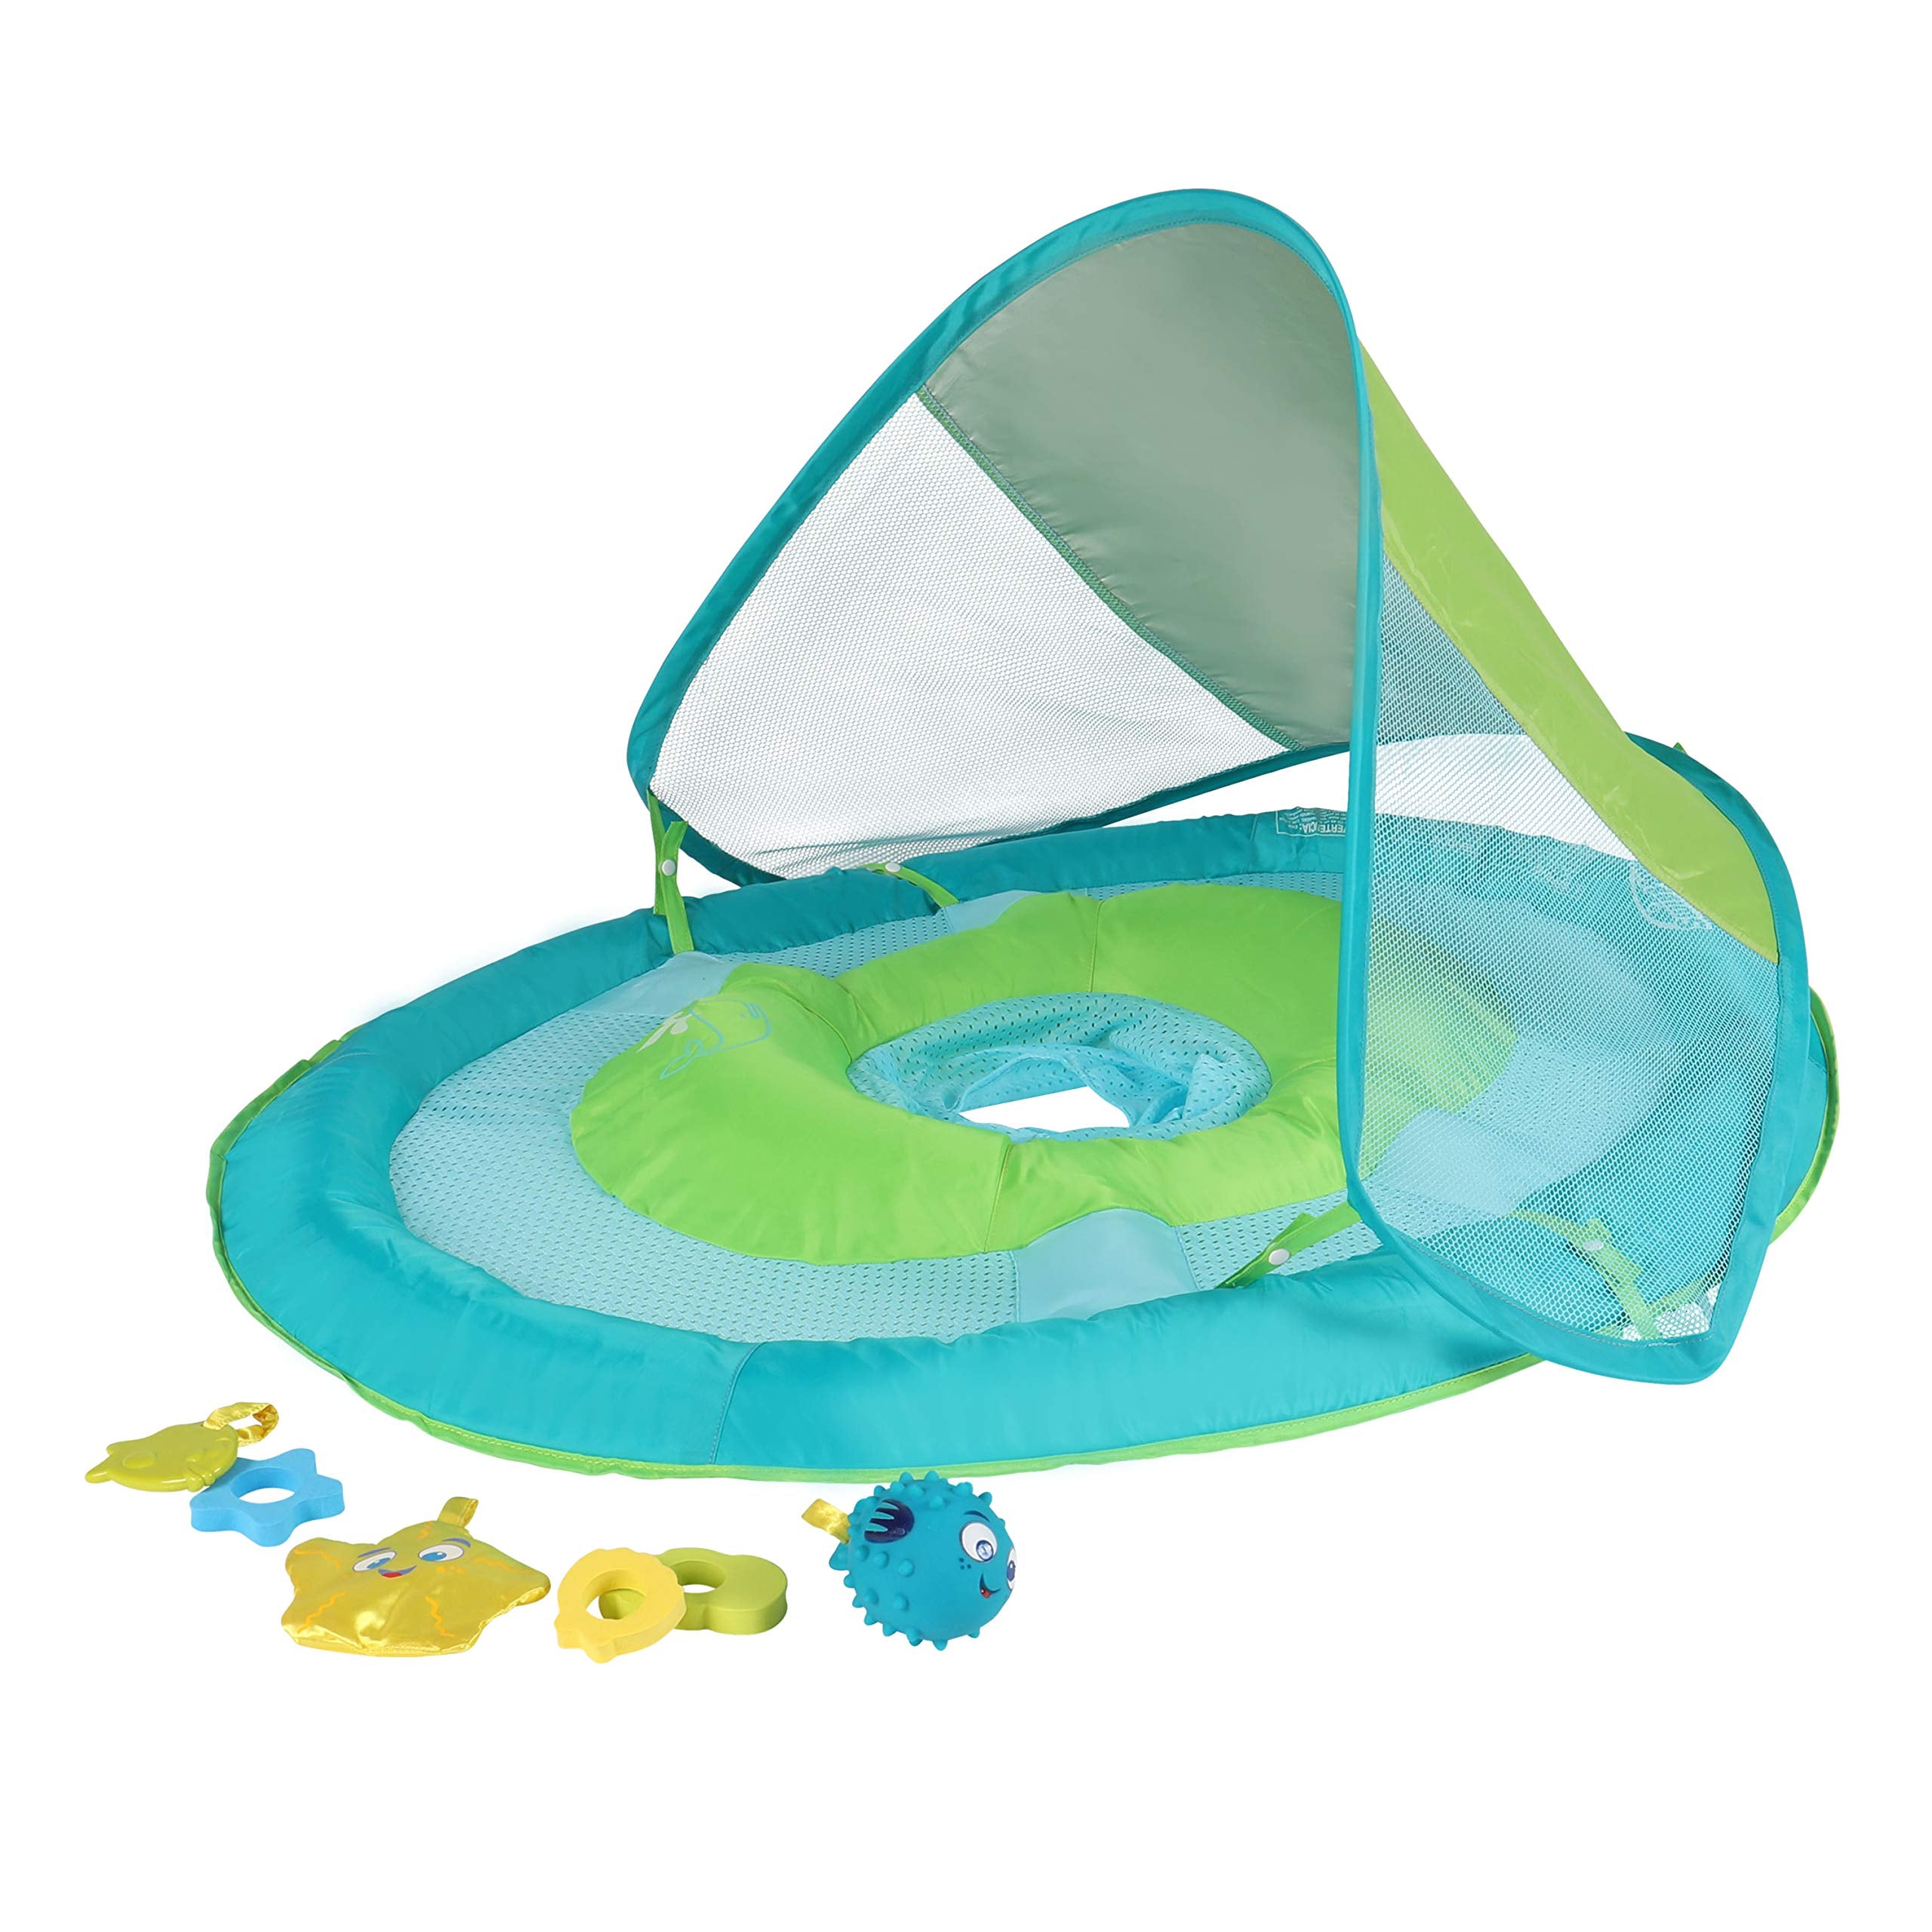 SwimWays Baby Spring Float with Canopy - Inflatable Float for Children with Detached Floating Toys and UPF Sun Protection - Aqua/Green